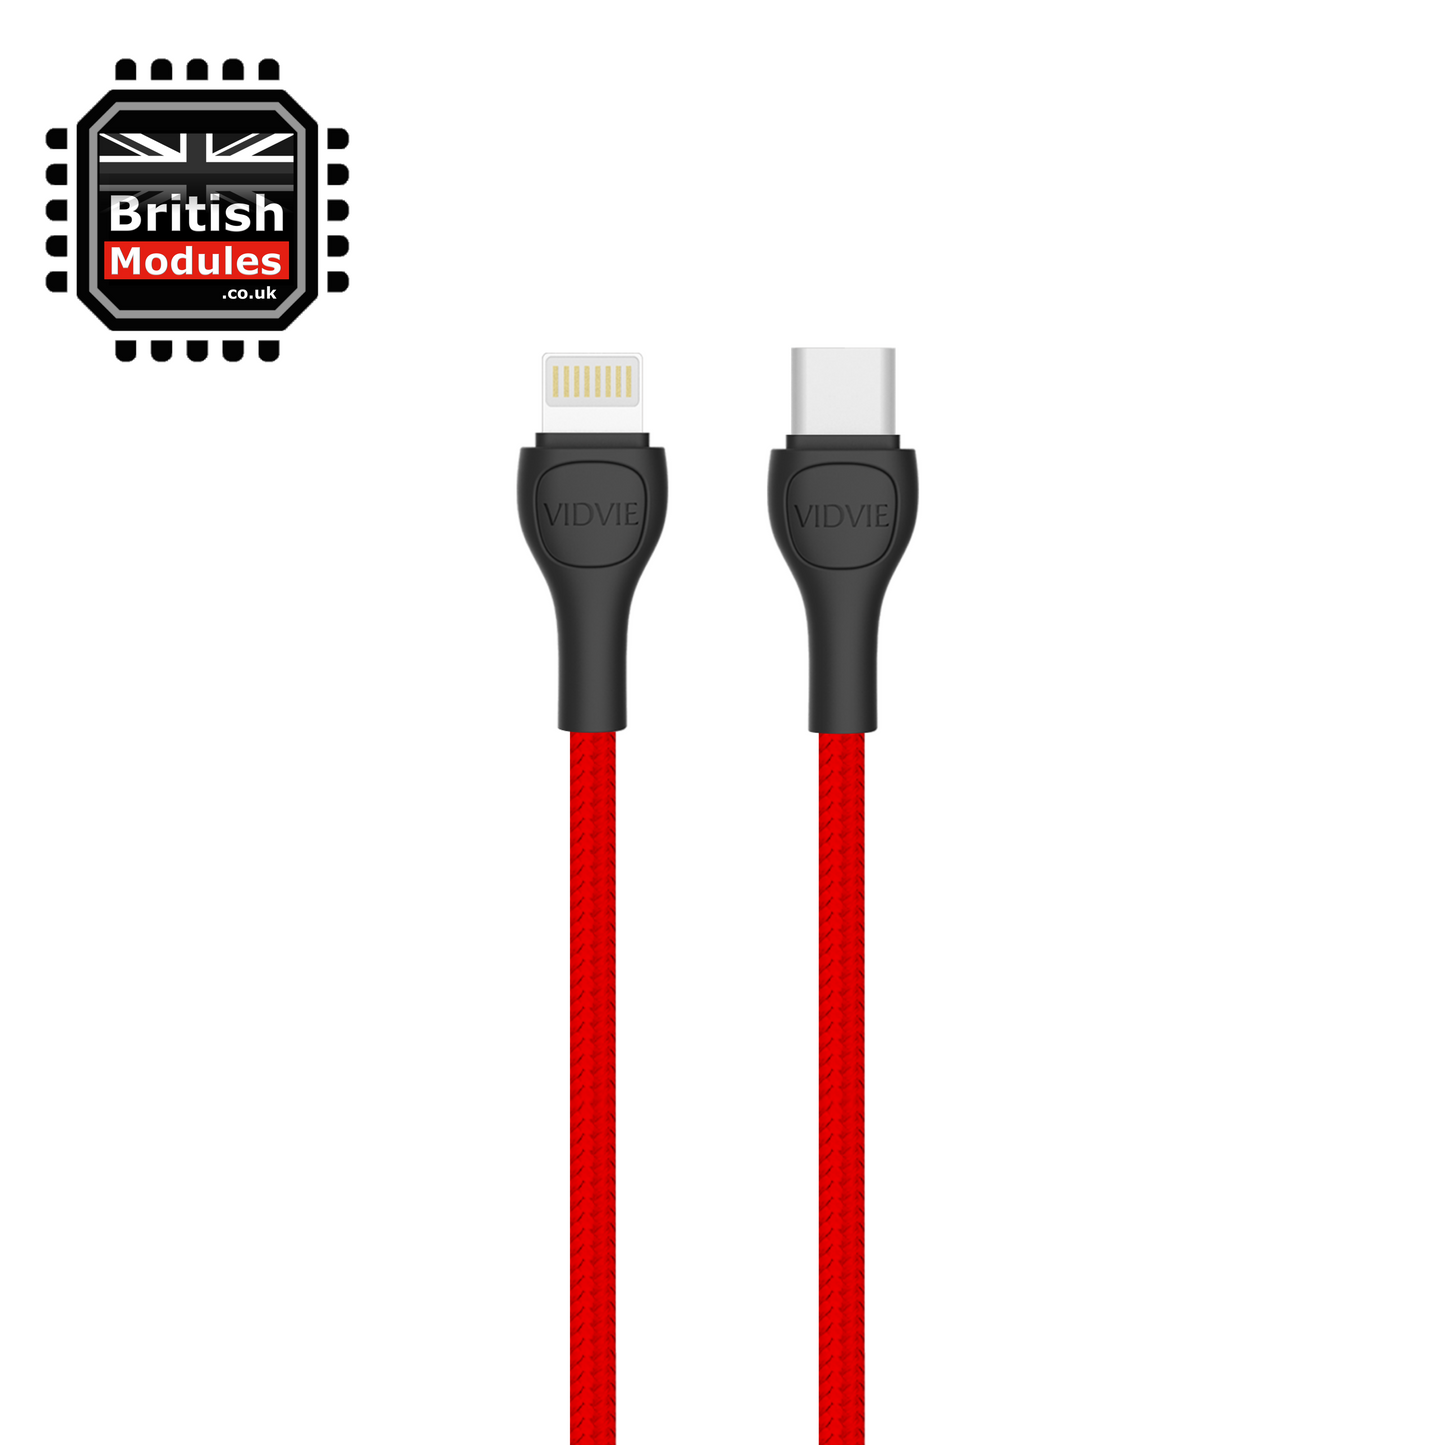 Heavy Duty iPhone Braided Fast Charging Cable Type-C to Lightning PD 20W by VidVie